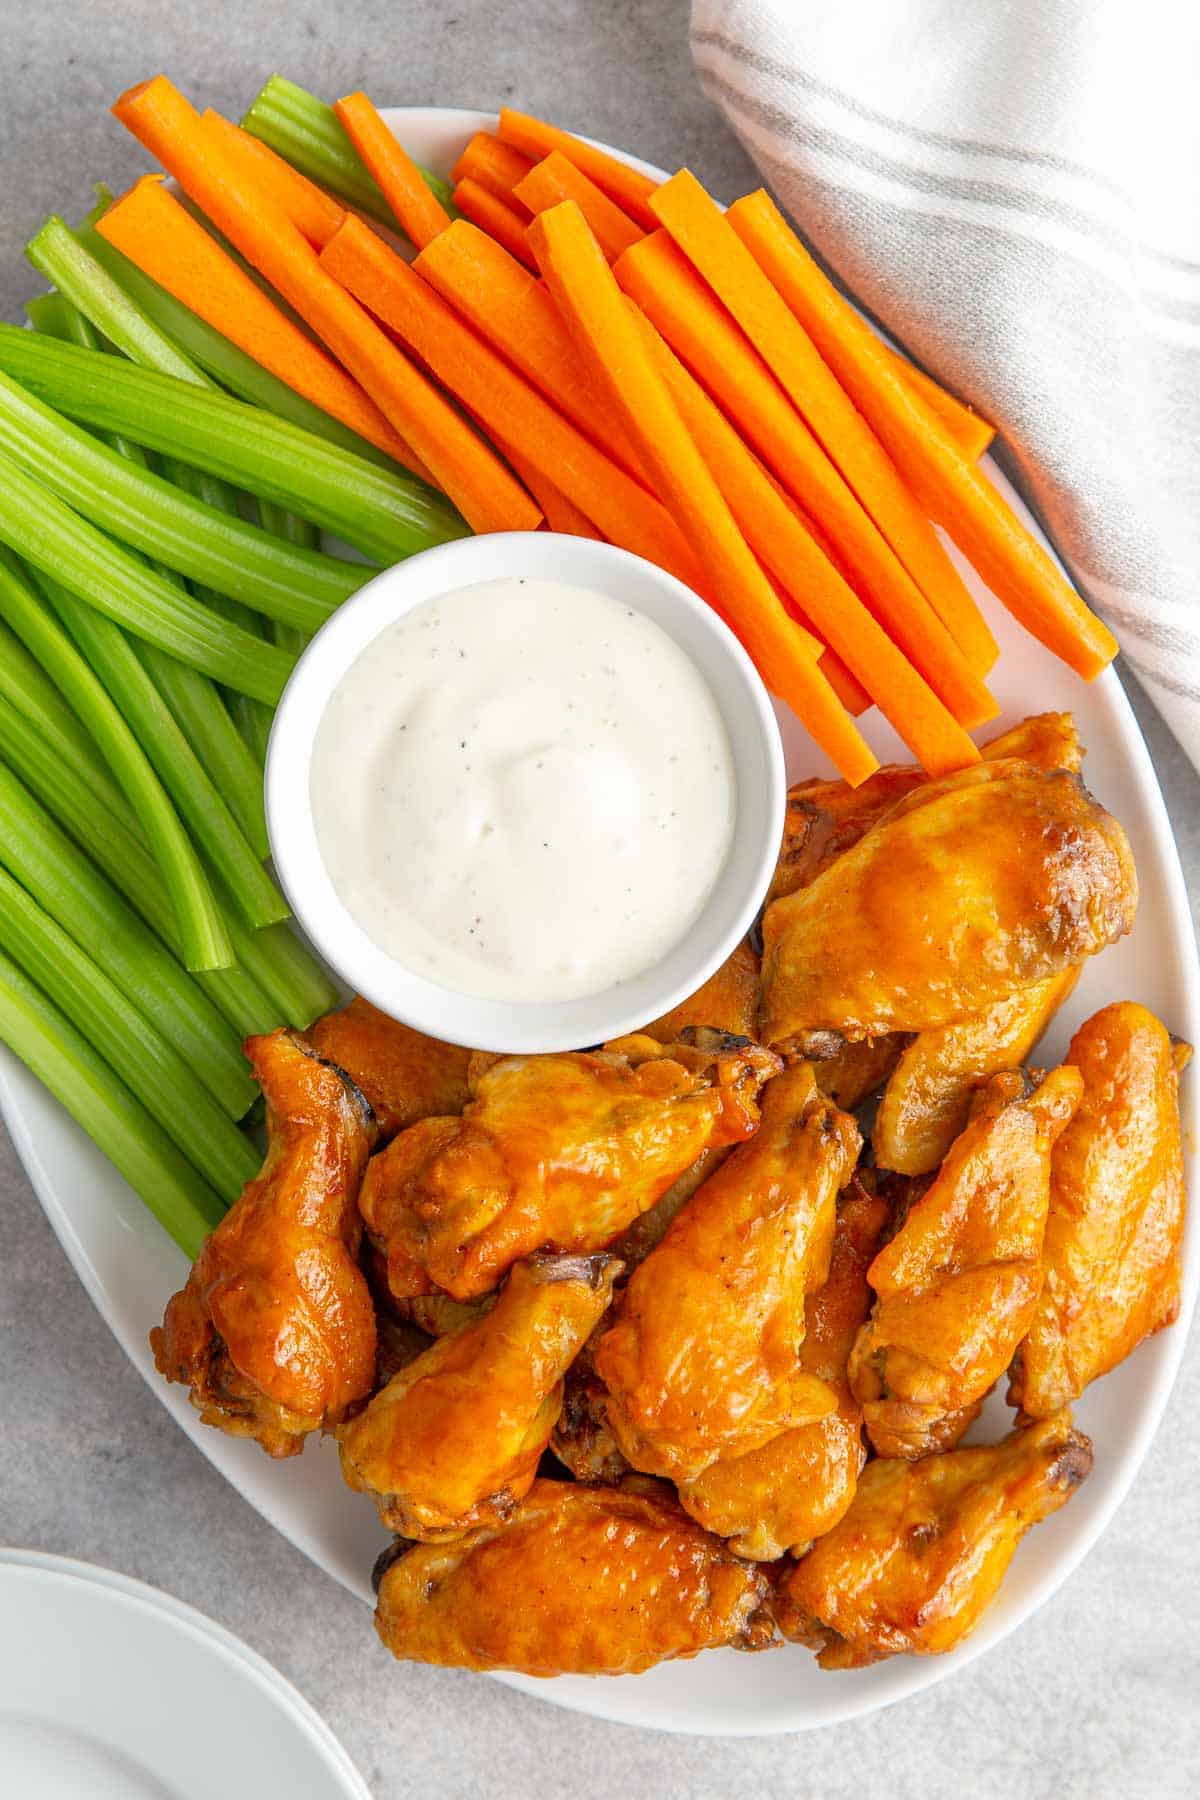 Buffalo wings, celery sticks, carrot sticks and a small bowl of ranch dressing on a white platter.